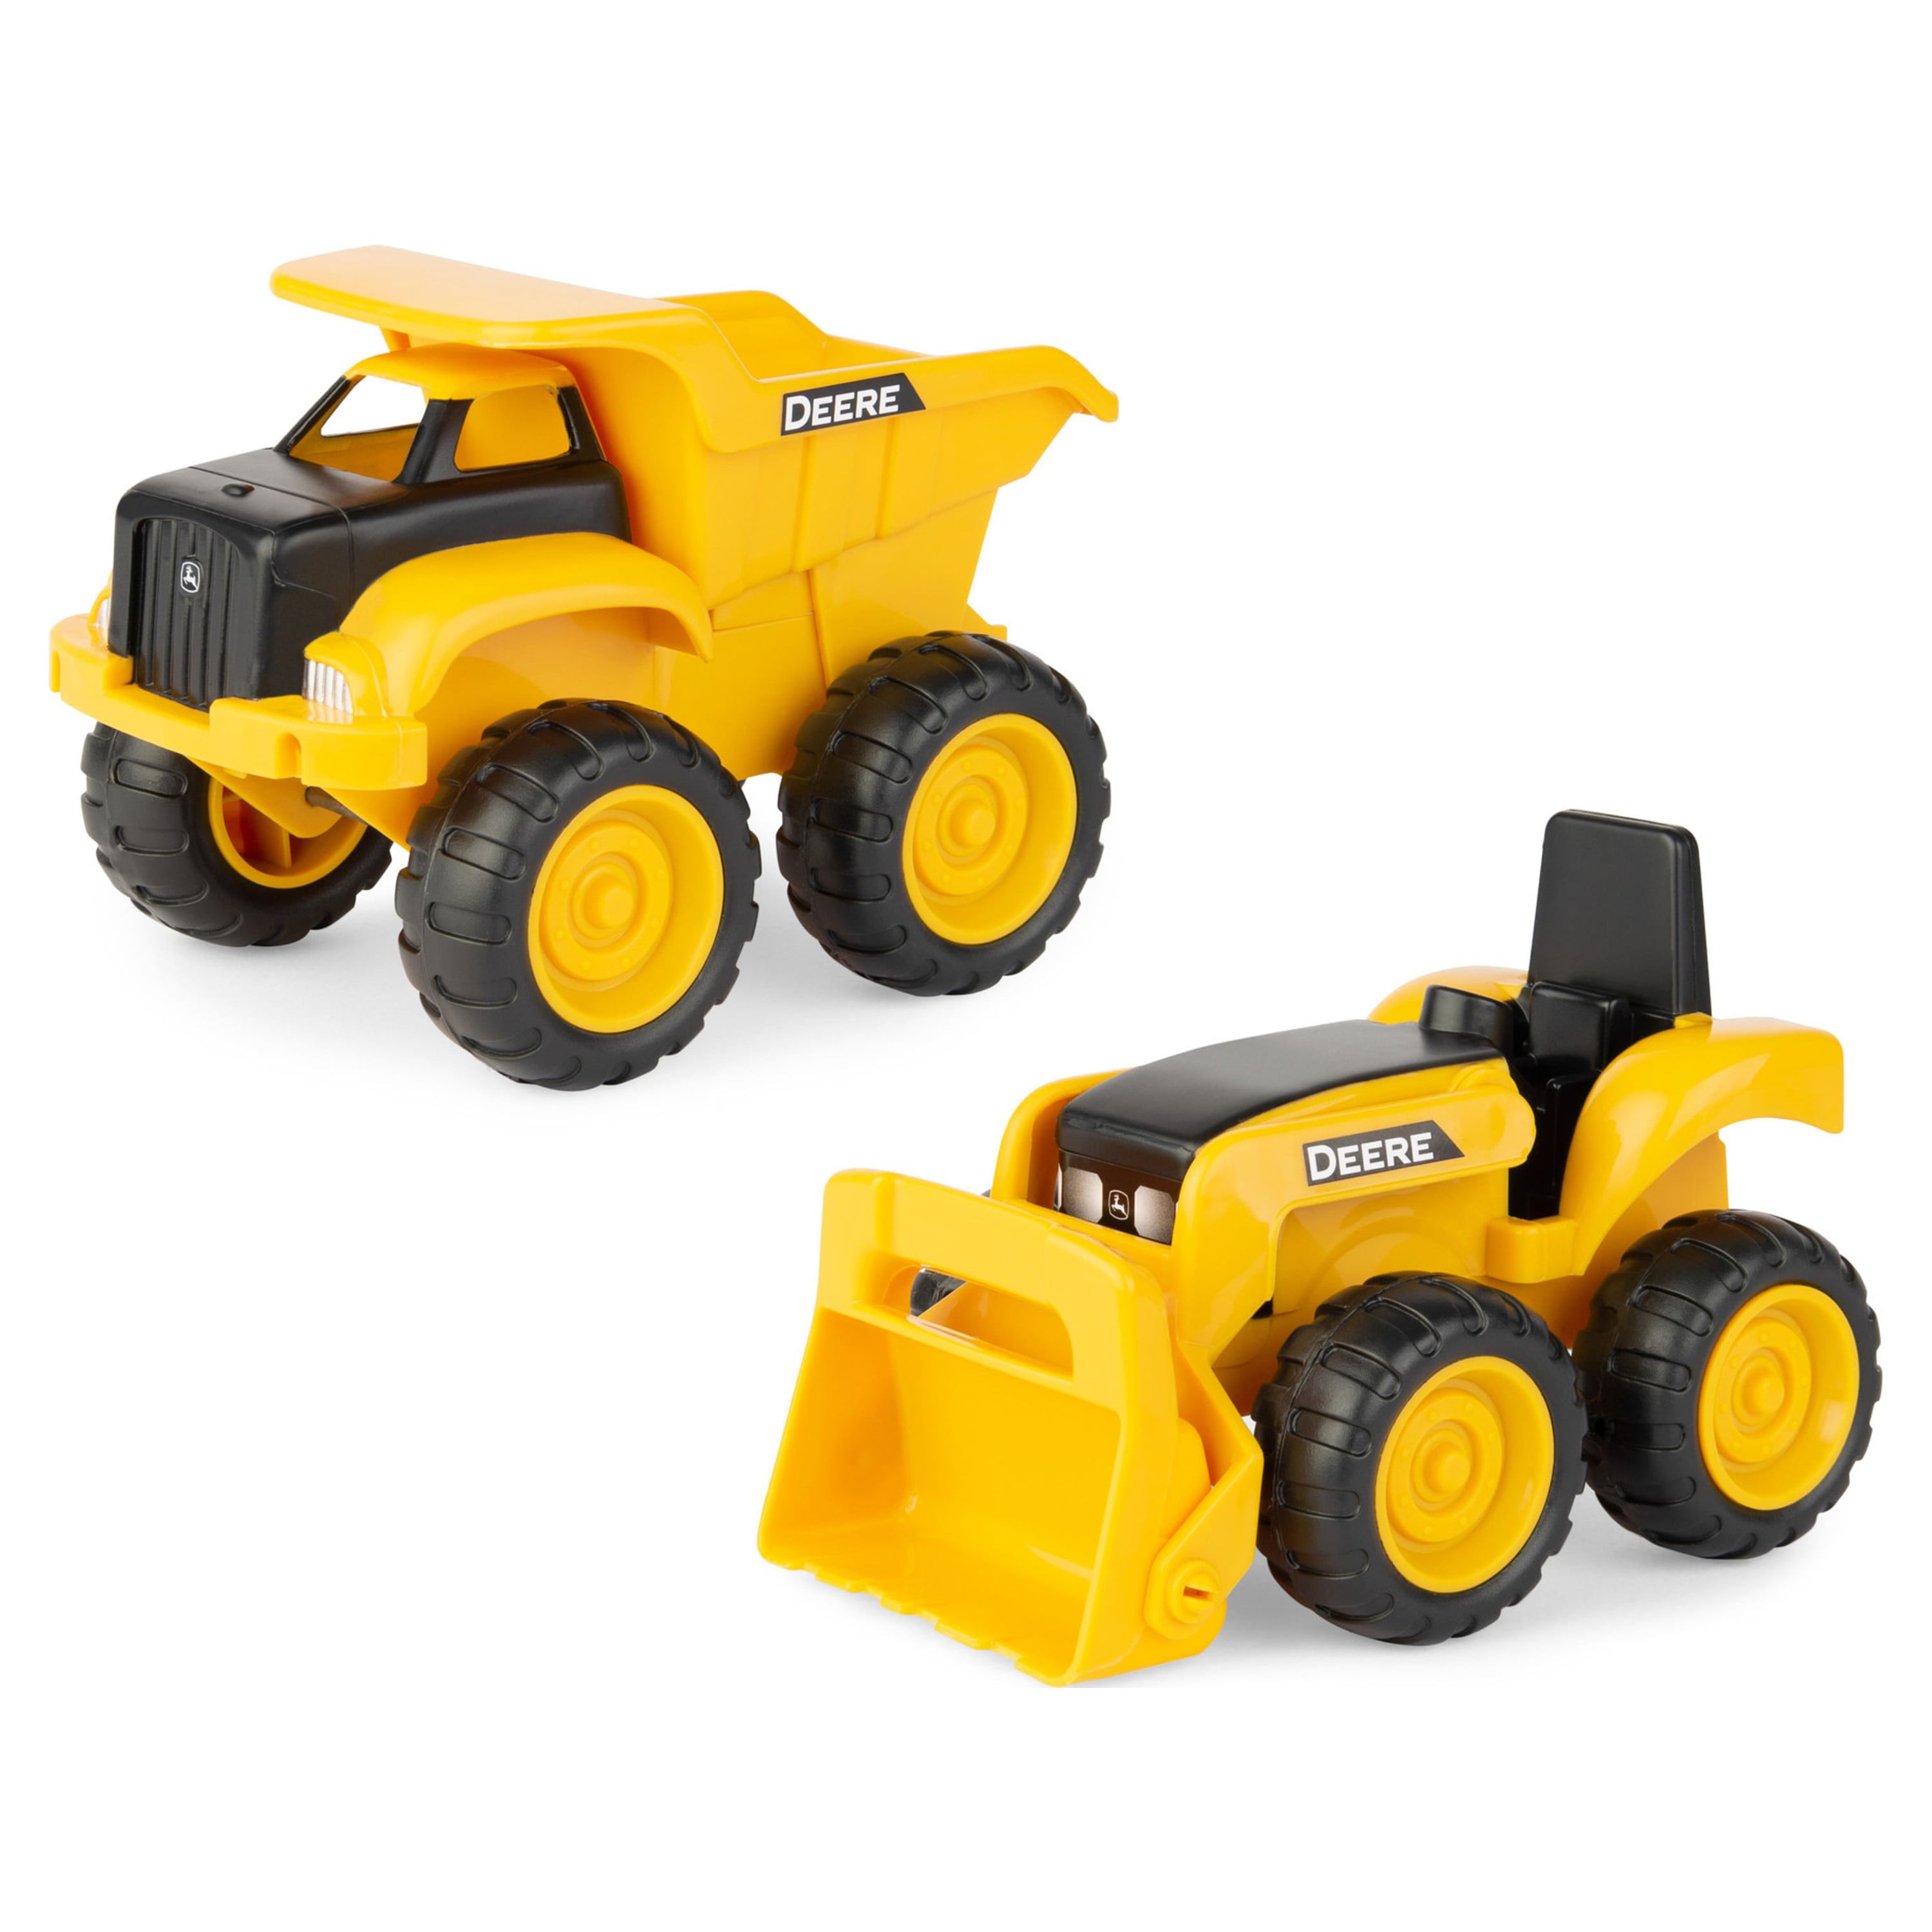 John Deere Sandbox 6" Construction Vehicle 2 Pack, Dump Truck & Tractor with Loader, Yellow - image 3 of 13